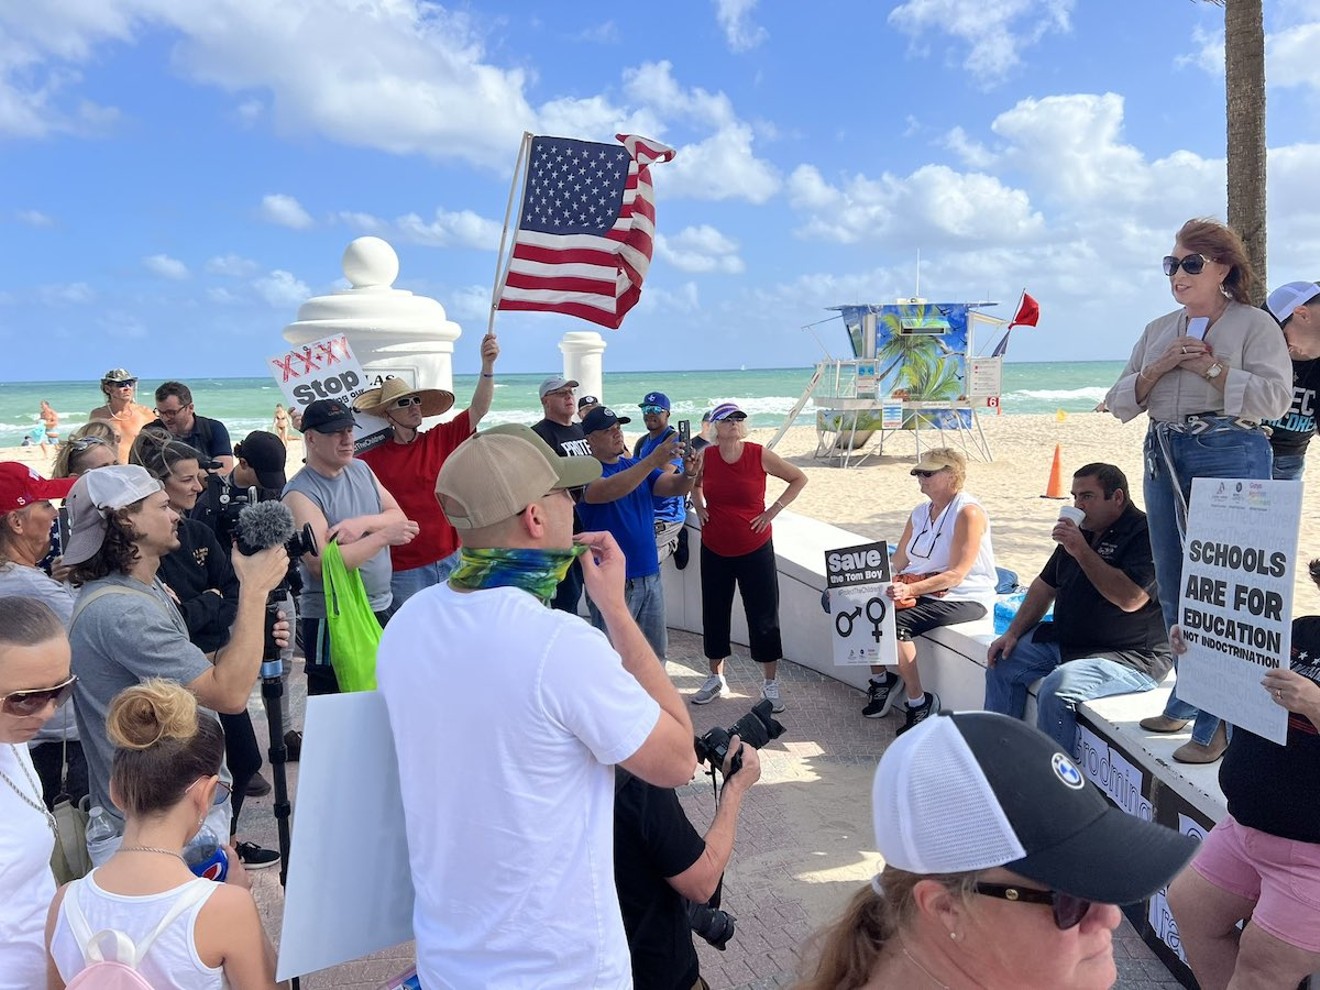 Brenda Fam, who was recently elected to the Broward County School Board, was spotted giving a speech at the "Protect Our Children" rally.